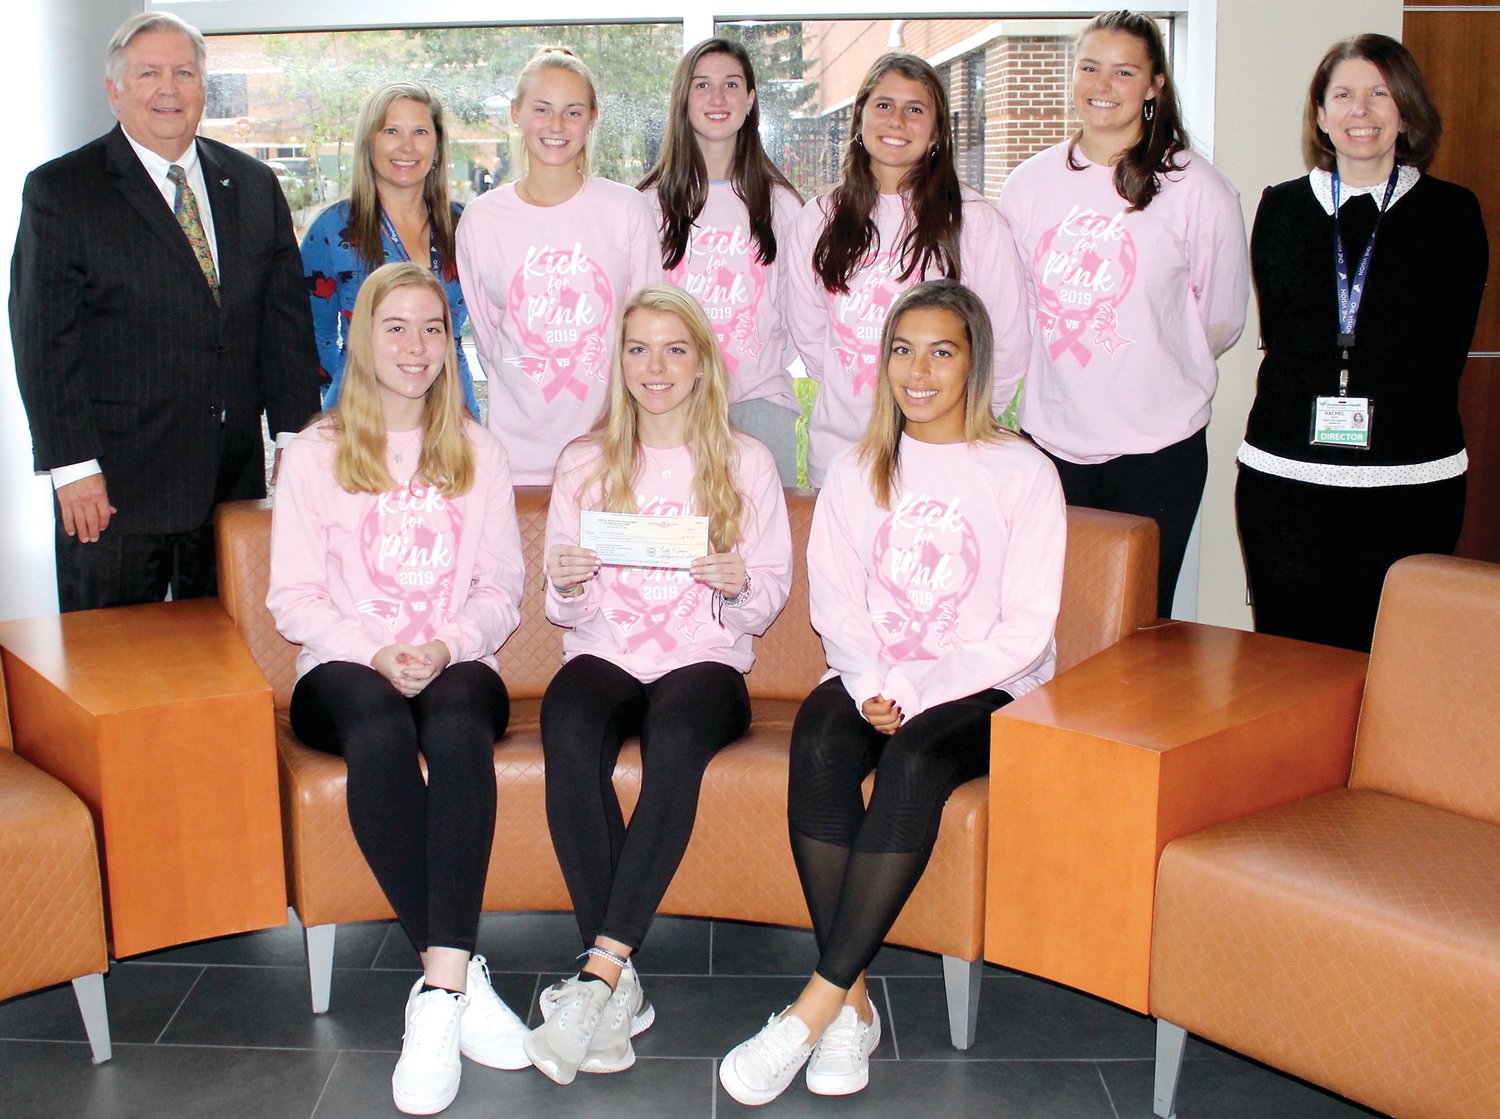 From left are: Front row: Erin Fitzsimmons, Ryan Fitzsimmons, Morgan Dorsey; back row, Doylestown Health President and CEO Jim Brexler; Amy Kyriakos, Oncology Services coordinator; Olivia Black, Tori Albrecht, Anna Valko, Marissa Plack and Rachel Saks, director of the Cancer Institute.. Not pictured: Jenna Abaza.